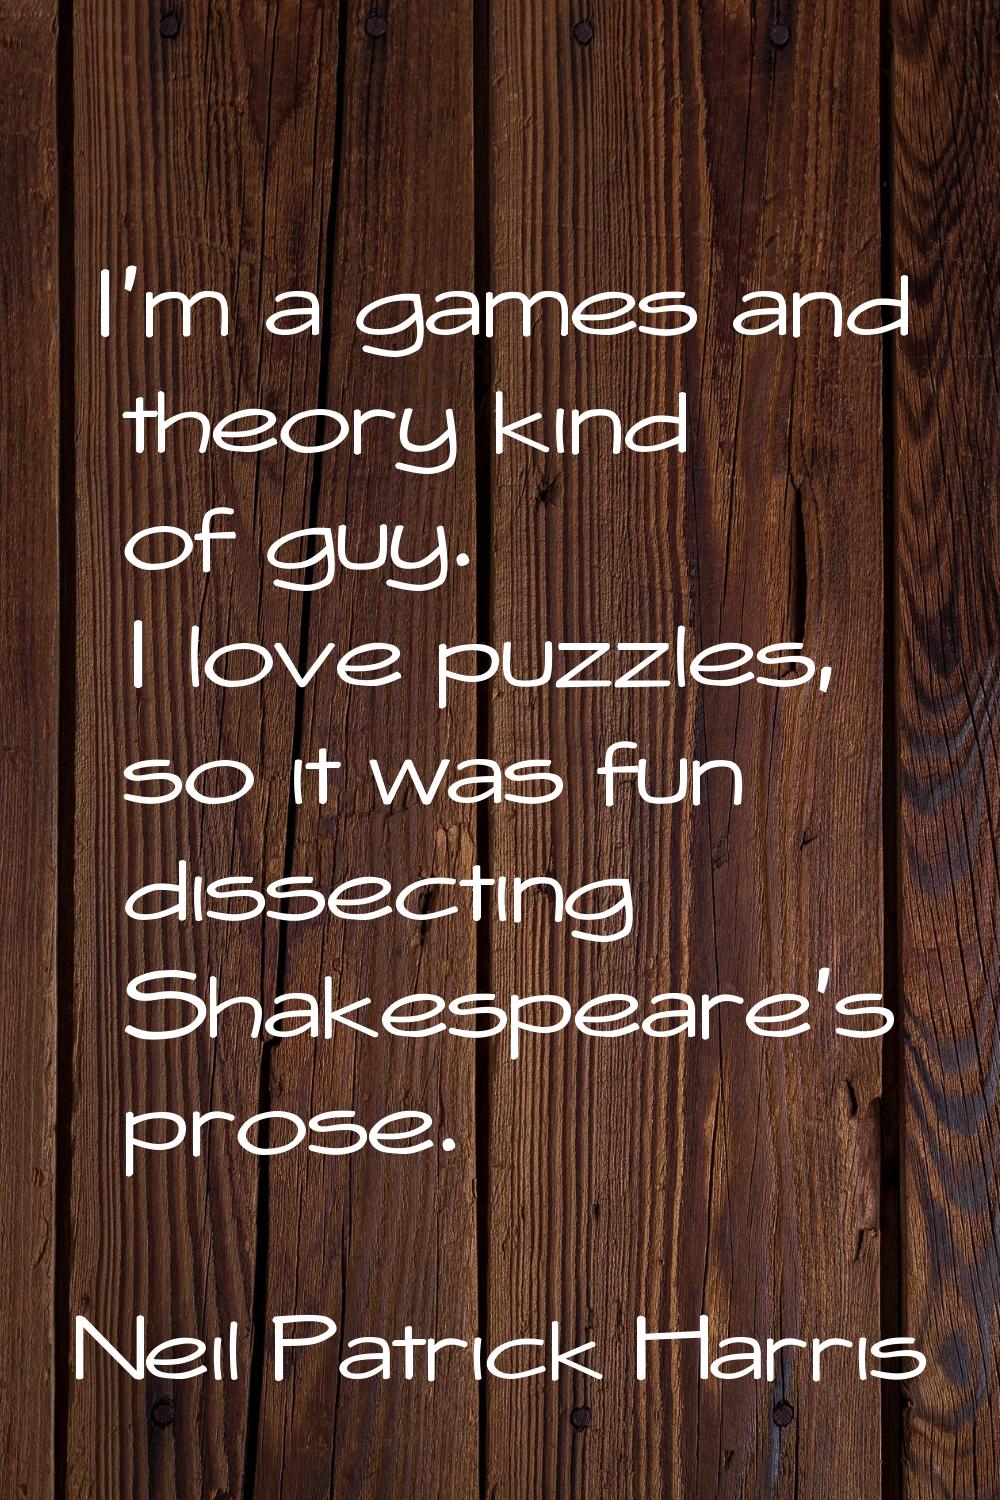 I'm a games and theory kind of guy. I love puzzles, so it was fun dissecting Shakespeare's prose.